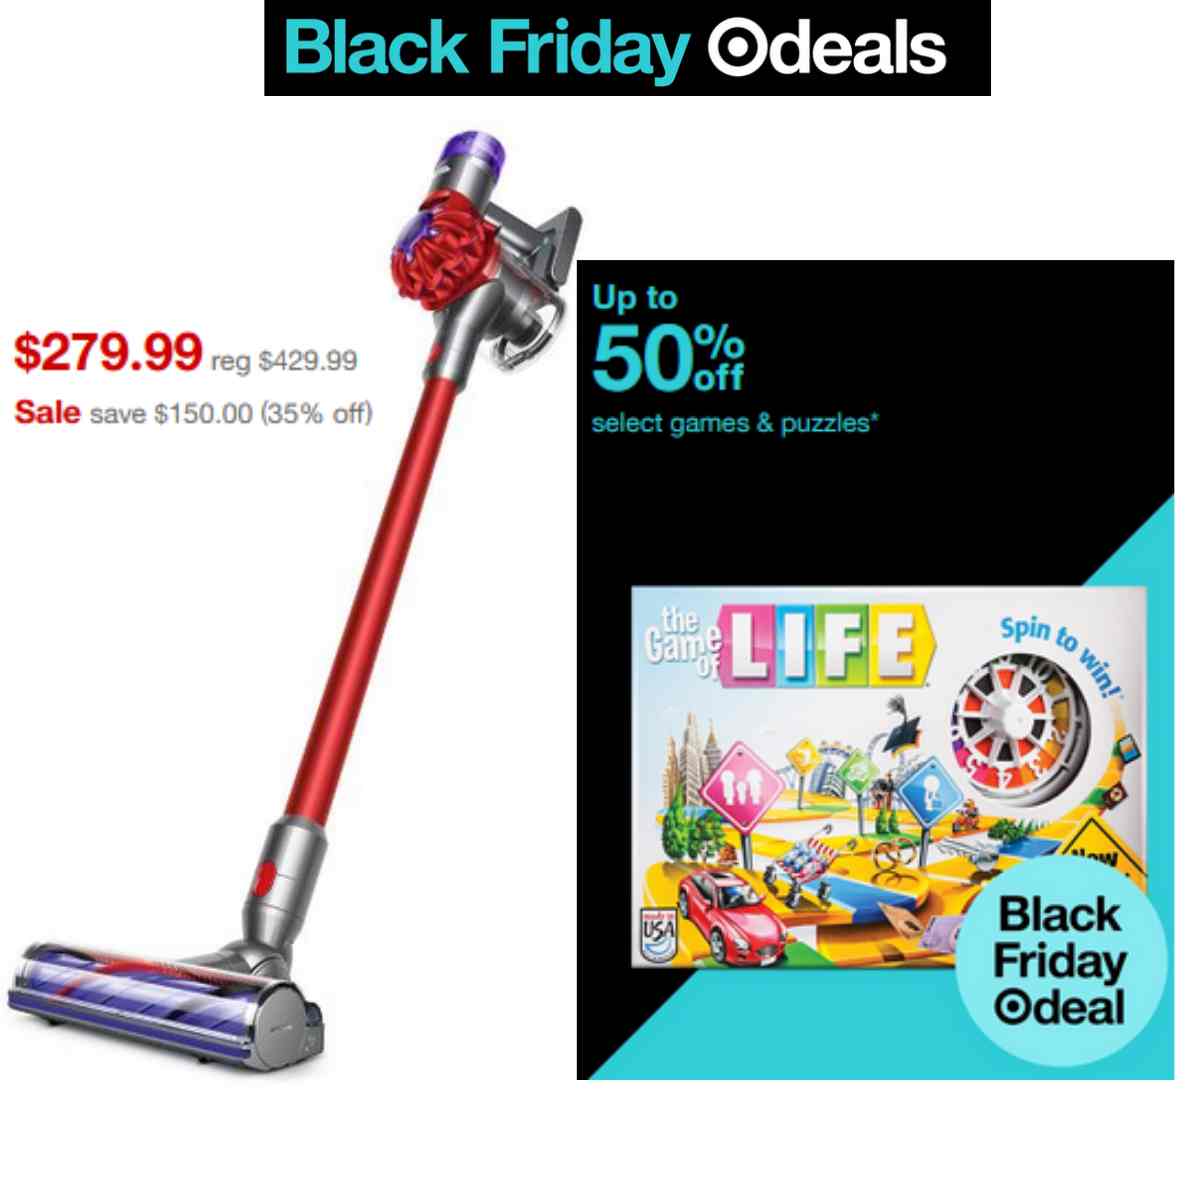 Black Friday deals Target - Save on toys/board games & Dyson vacuum cleaner | Smart Savers